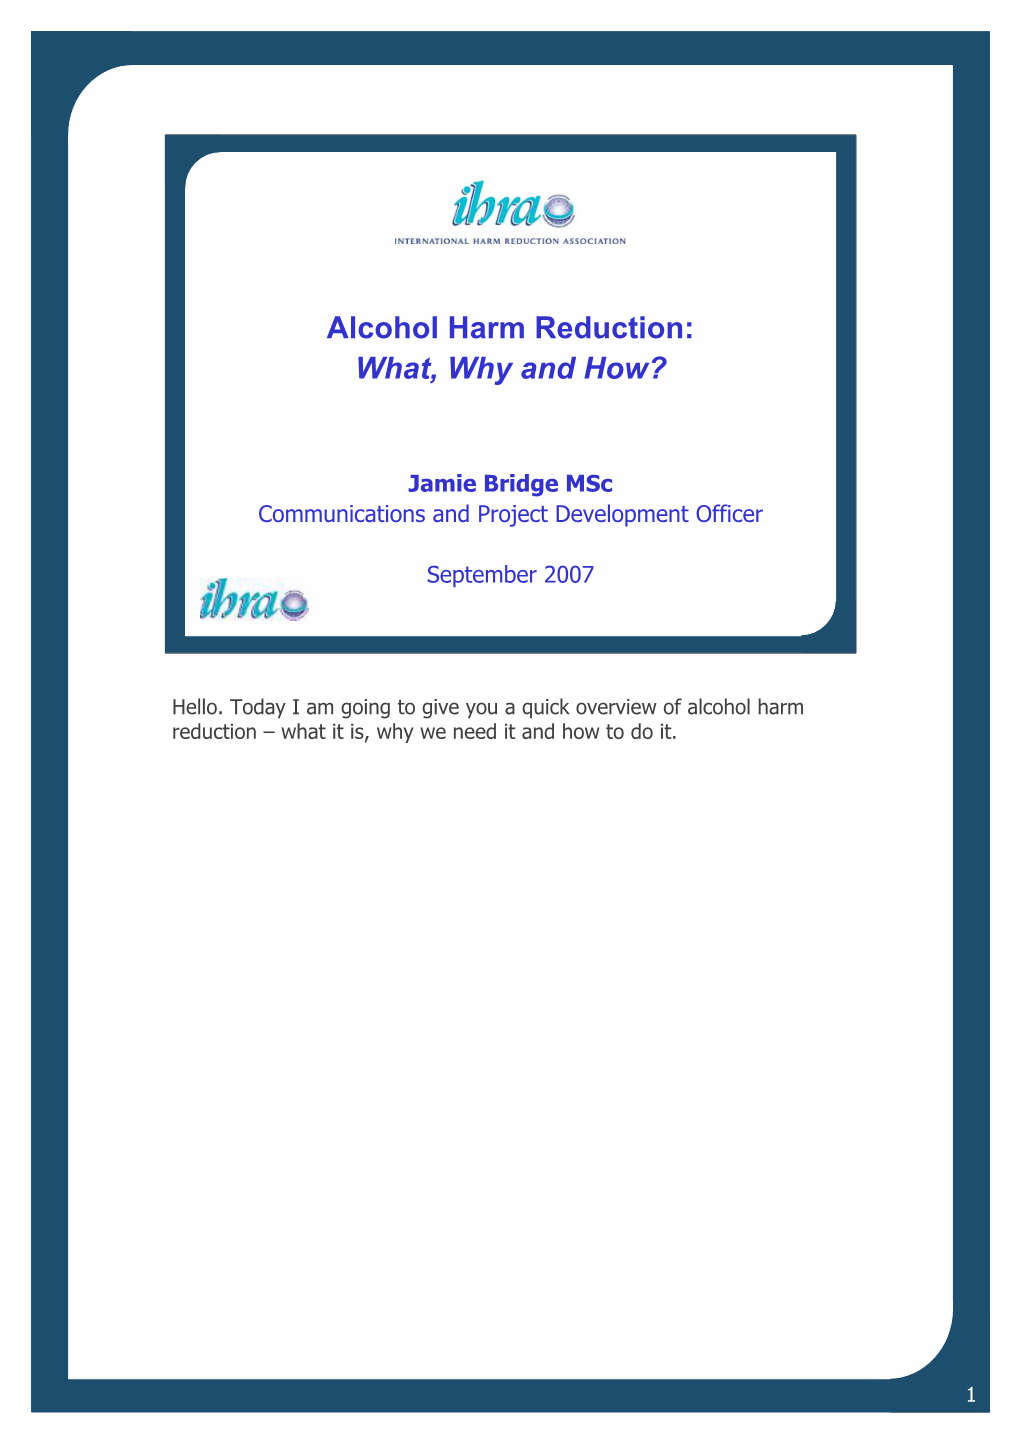 Presentation ('Alcohol Harm Reduction: What, Why and How?')